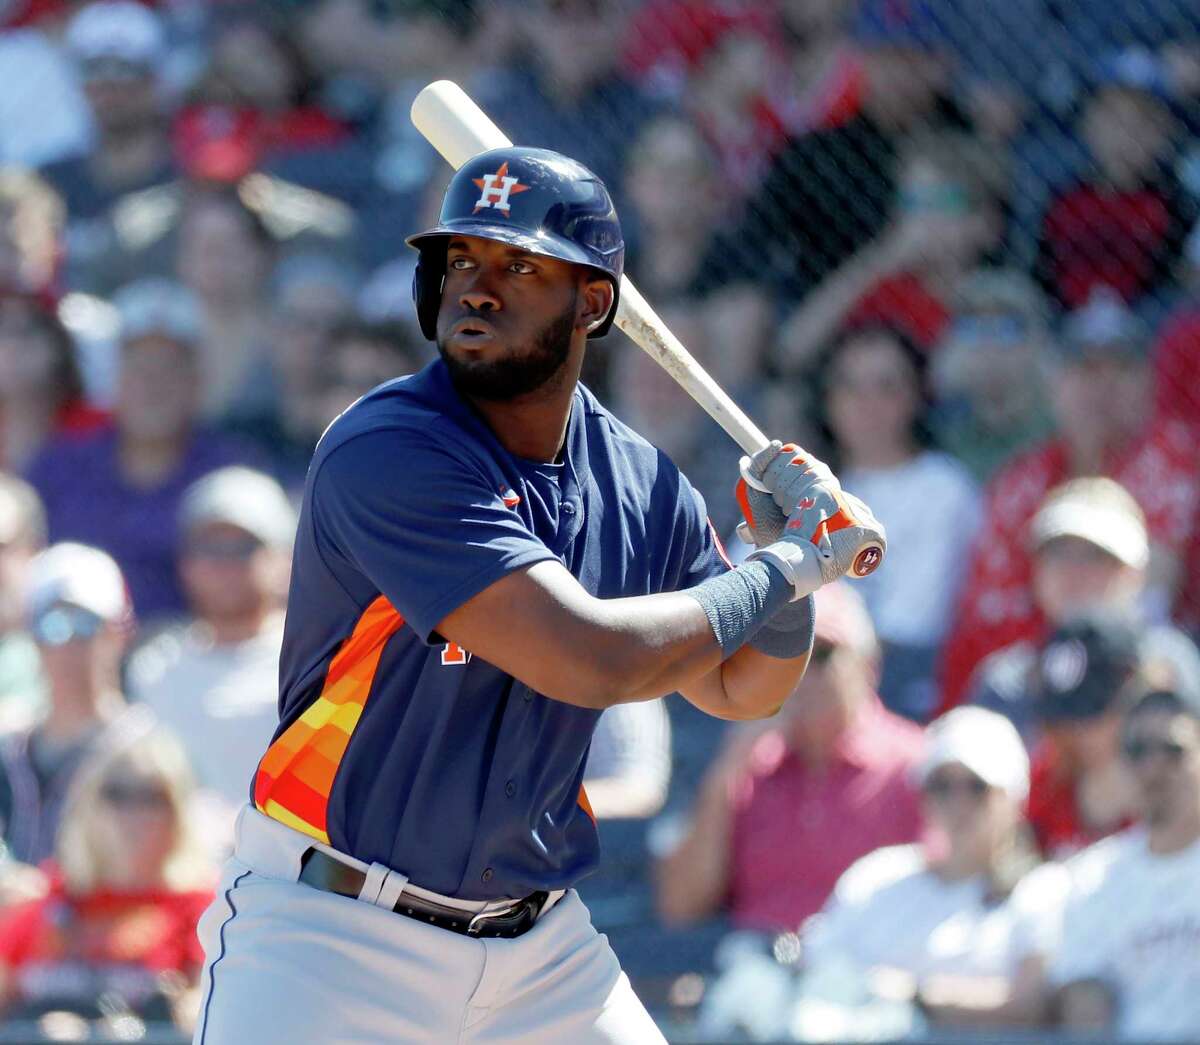 Houston Astros designated hitter Yordan Alvarez (44) strikes out in the first inning during a spring training game against the Washington Nationals at the Fitteam Ballpark of The Palm Beaches, in West Palm Beach, Sunday, Feb. 23, 2020.